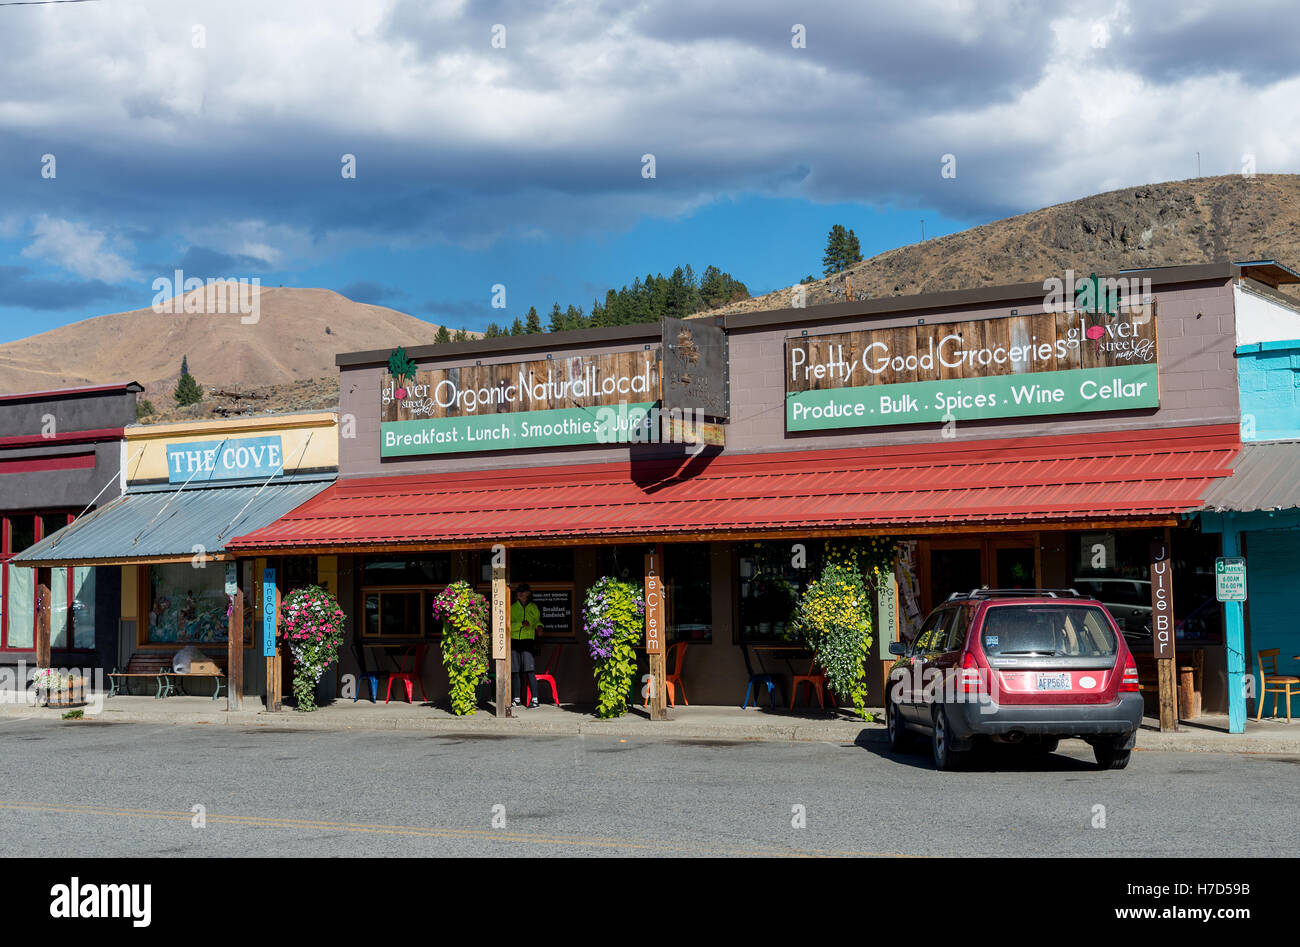 Store selling organic and natural food in small town Twisp, Washington, USA. Stock Photo